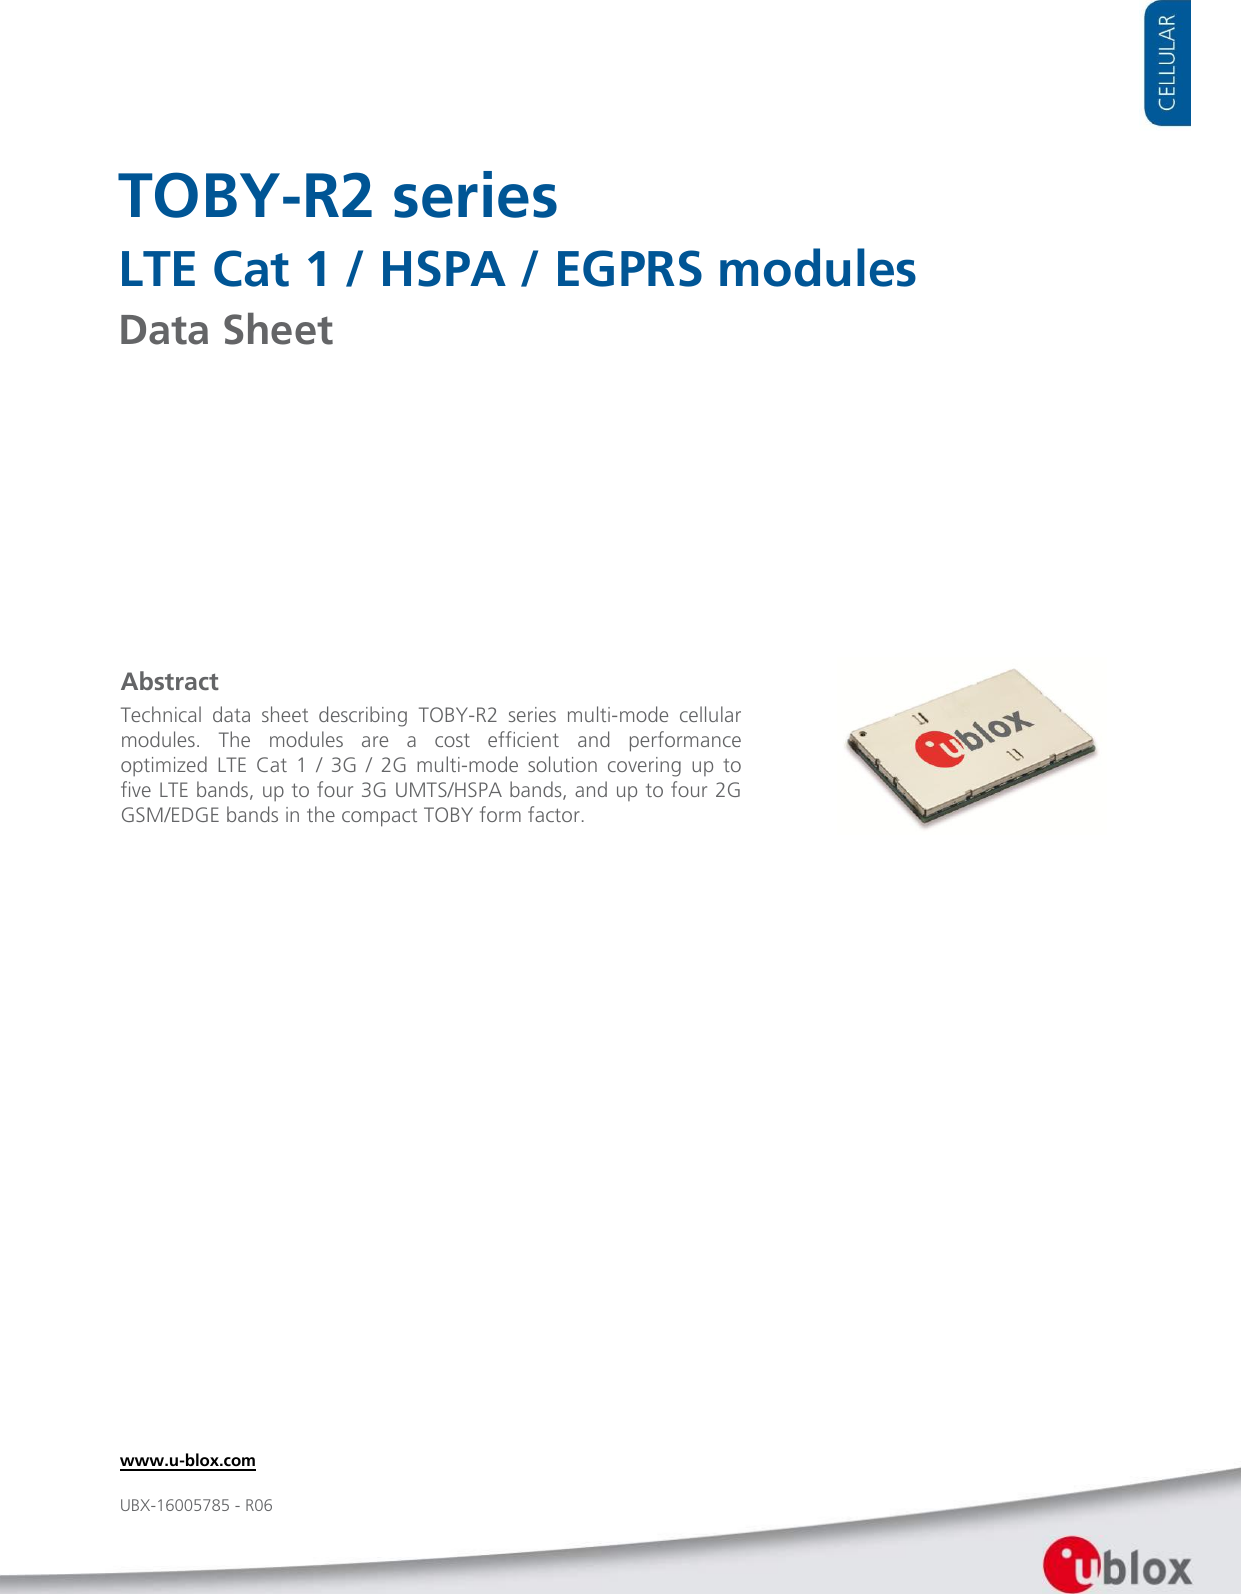     TOBY-R2 series LTE Cat 1 / HSPA / EGPRS modules Data Sheet             Abstract Technical  data  sheet  describing  TOBY-R2  series  multi-mode  cellular modules.  The  modules  are  a  cost  efficient  and  performance optimized  LTE  Cat  1  /  3G  /  2G  multi-mode  solution  covering  up  to five LTE bands, up to four 3G UMTS/HSPA bands, and up to four 2G GSM/EDGE bands in the compact TOBY form factor. www.u-blox.com UBX-16005785 - R06 